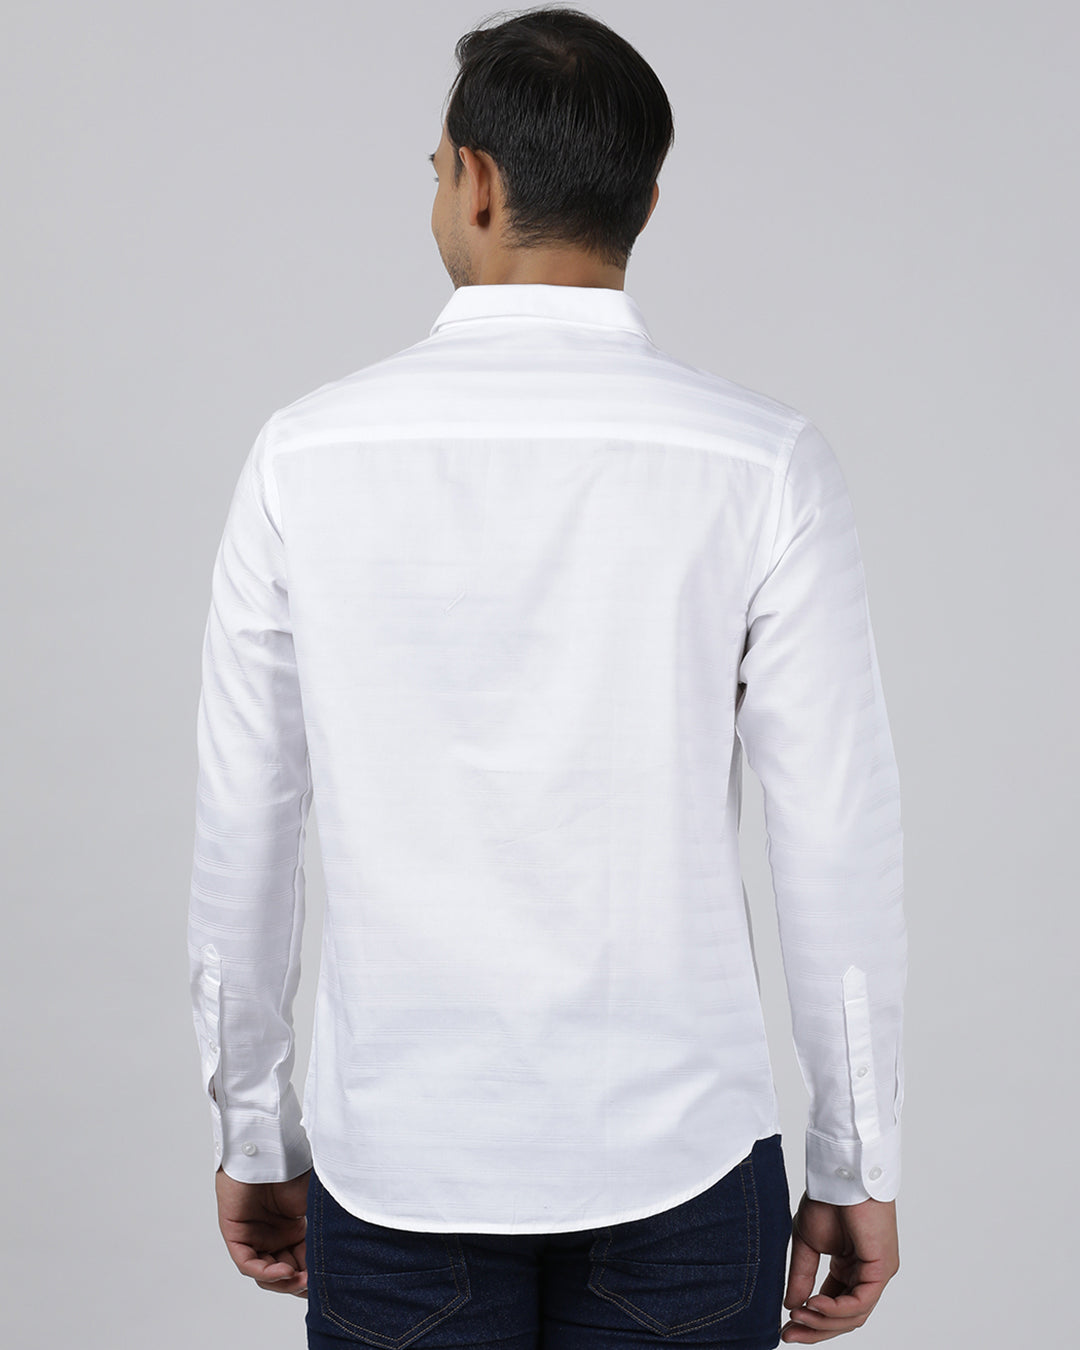 Casual White Full Sleeve Regular Fit Solid Shirt with Collar for Men